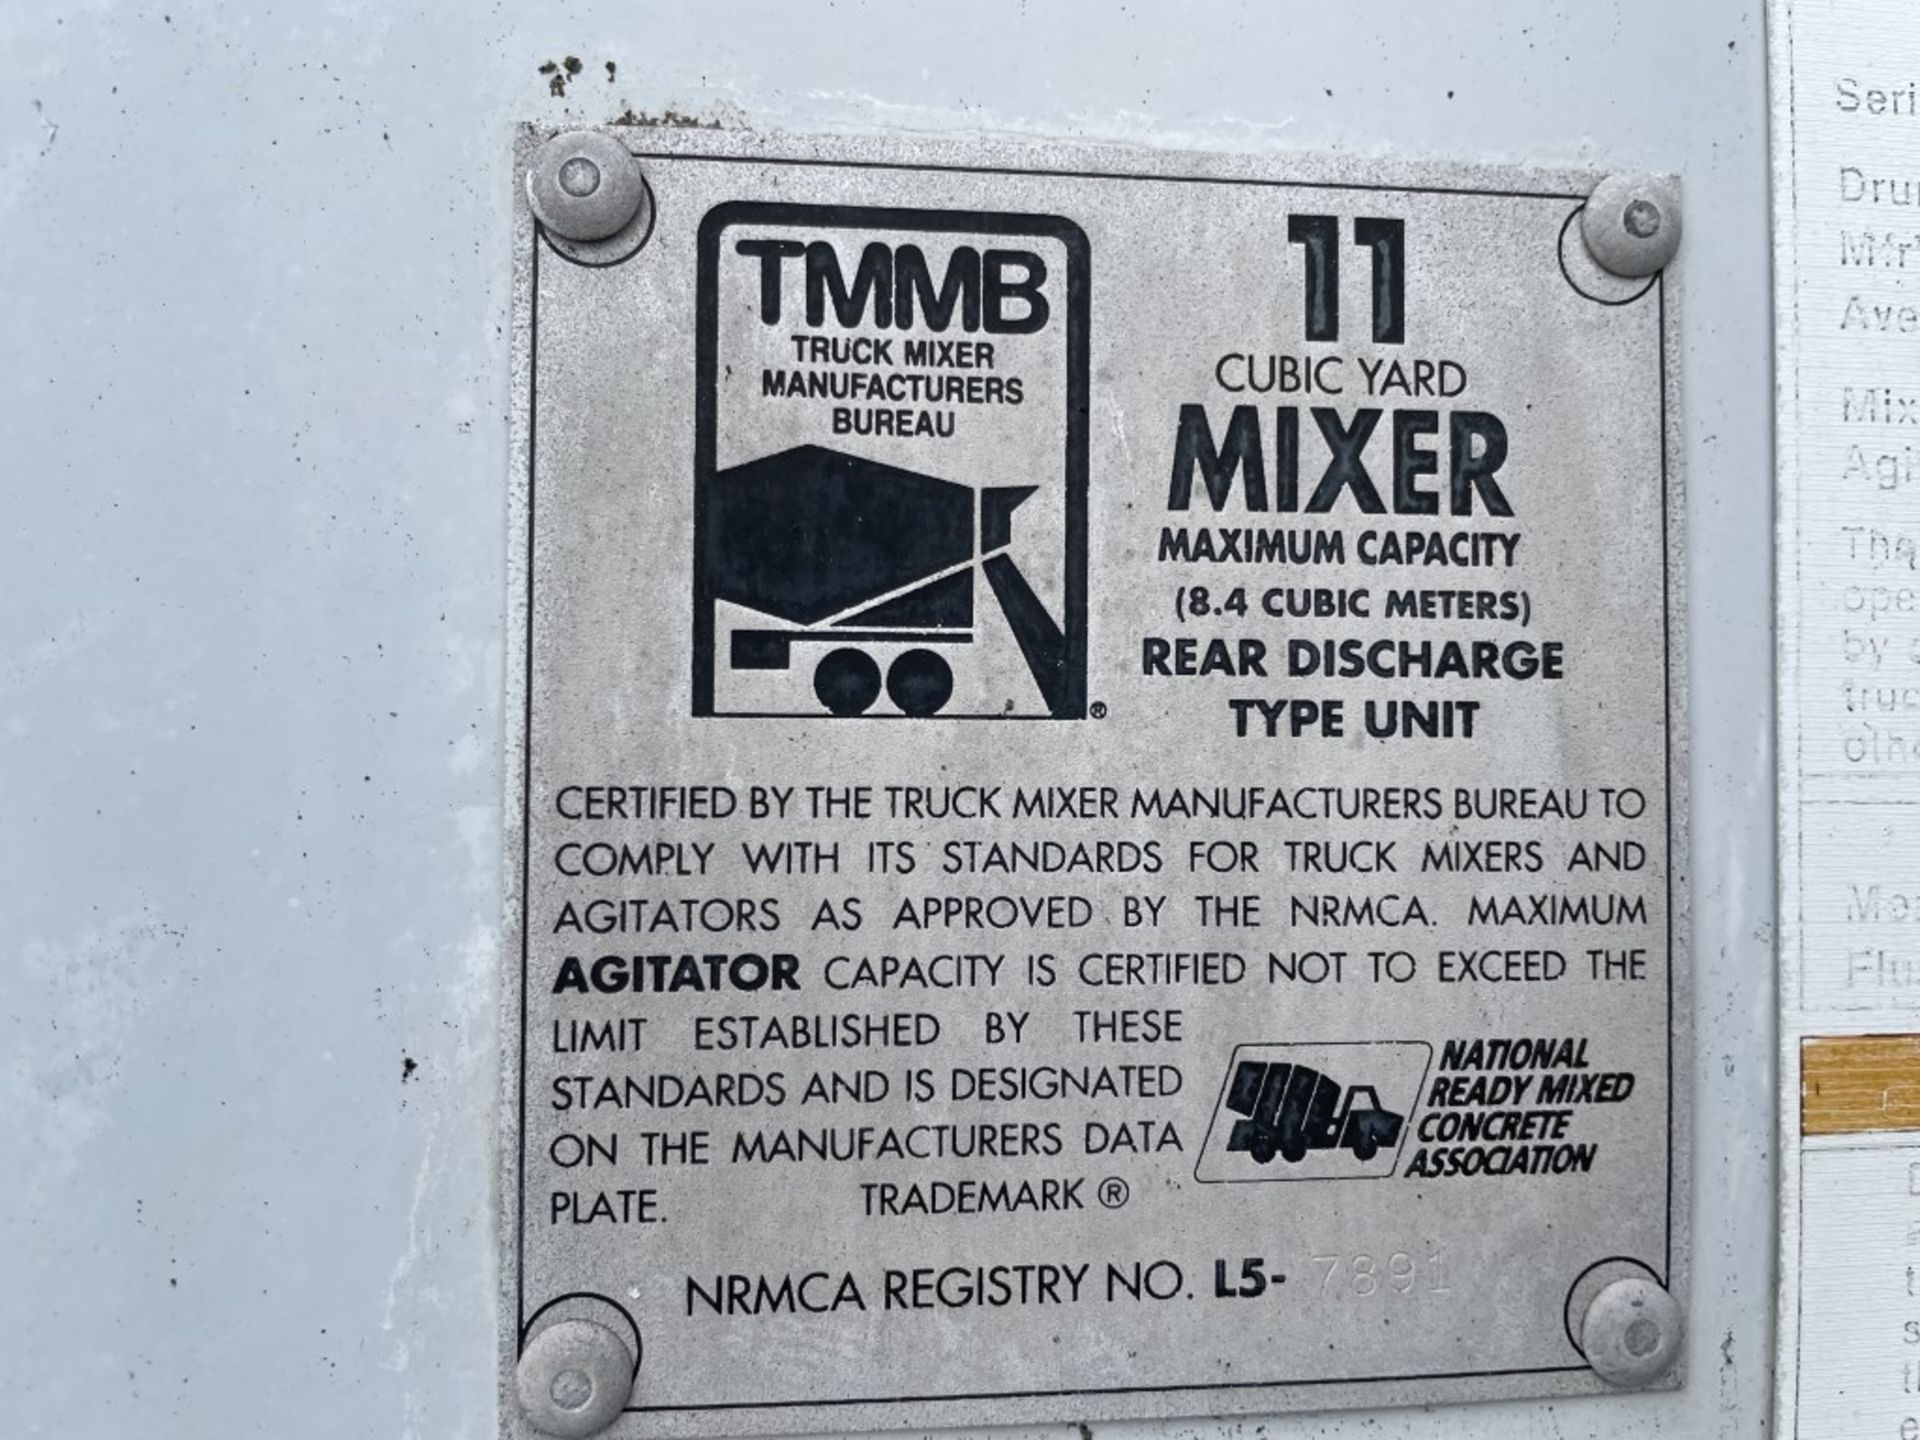 1998 Freightliner T/A Mixer Truck - Image 10 of 37